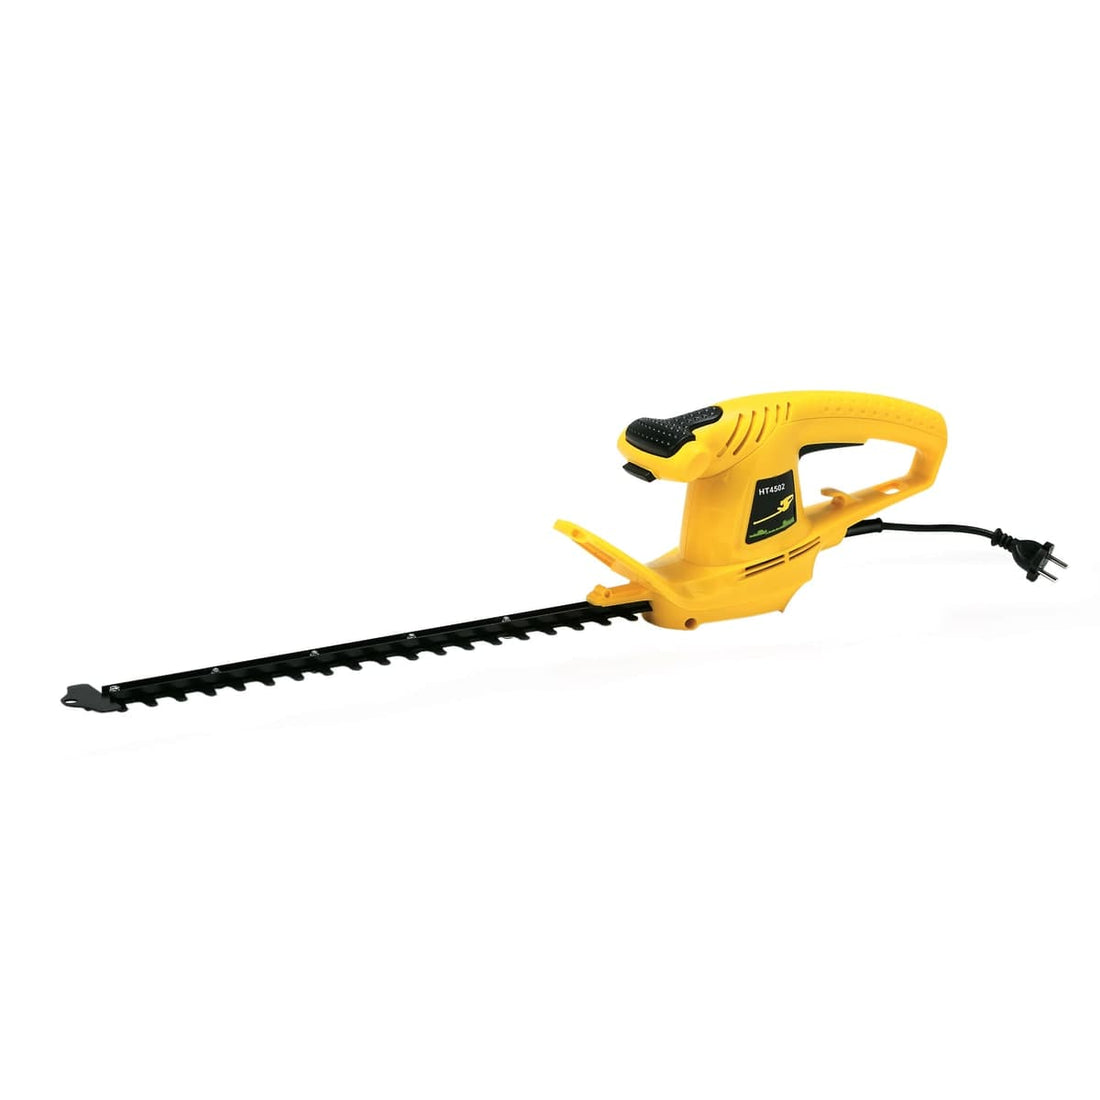 HT4502 ELECTRIC HEDGE TRIMMER - best price from Maltashopper.com BR500007018